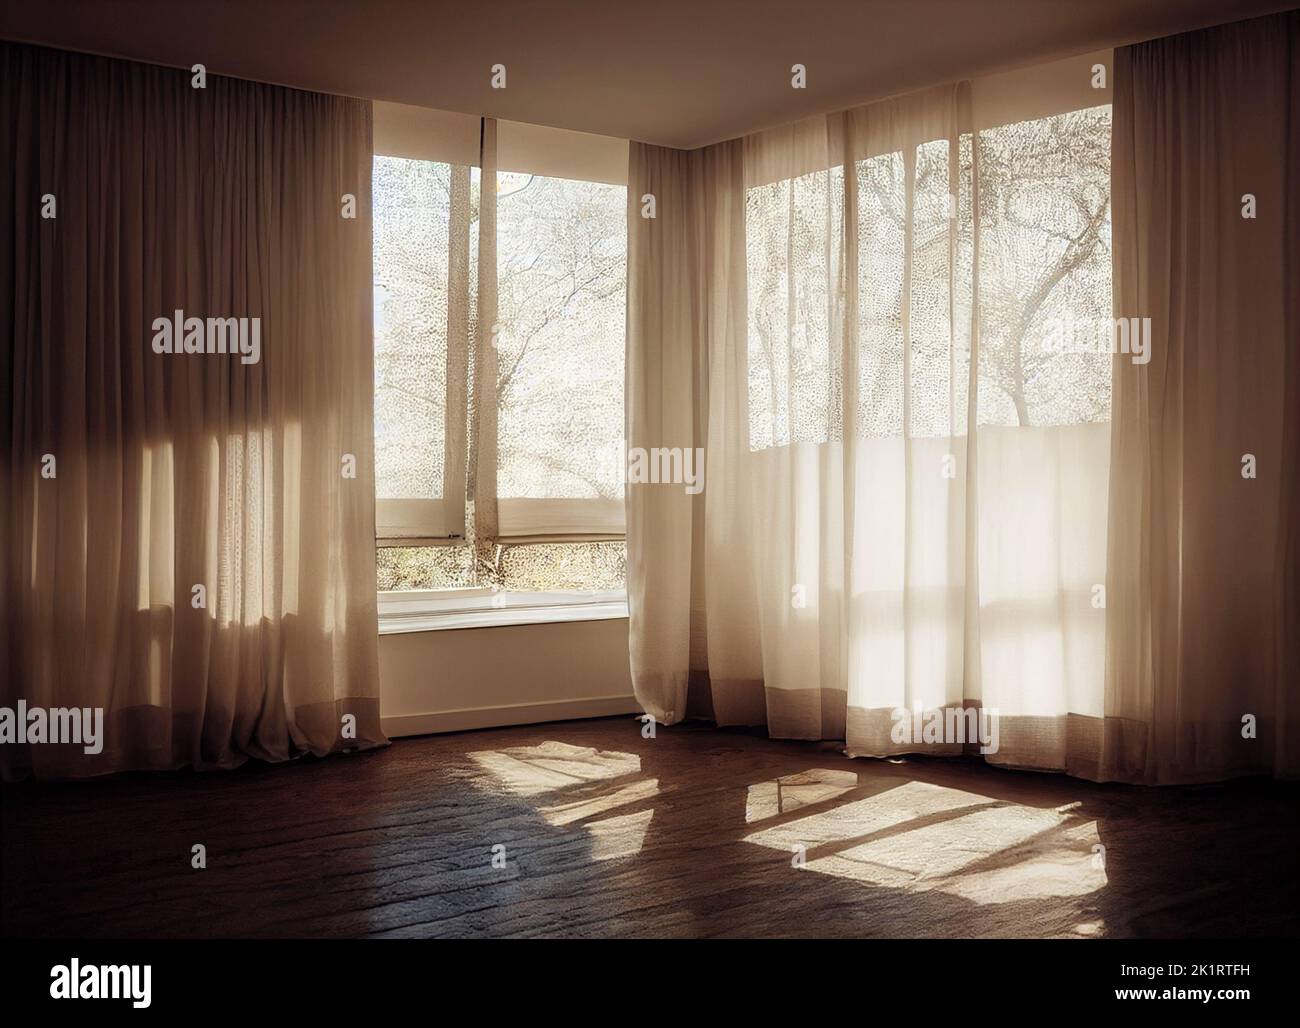 The large window and curtain with sunlight, Digital Generate Image Stock Photo